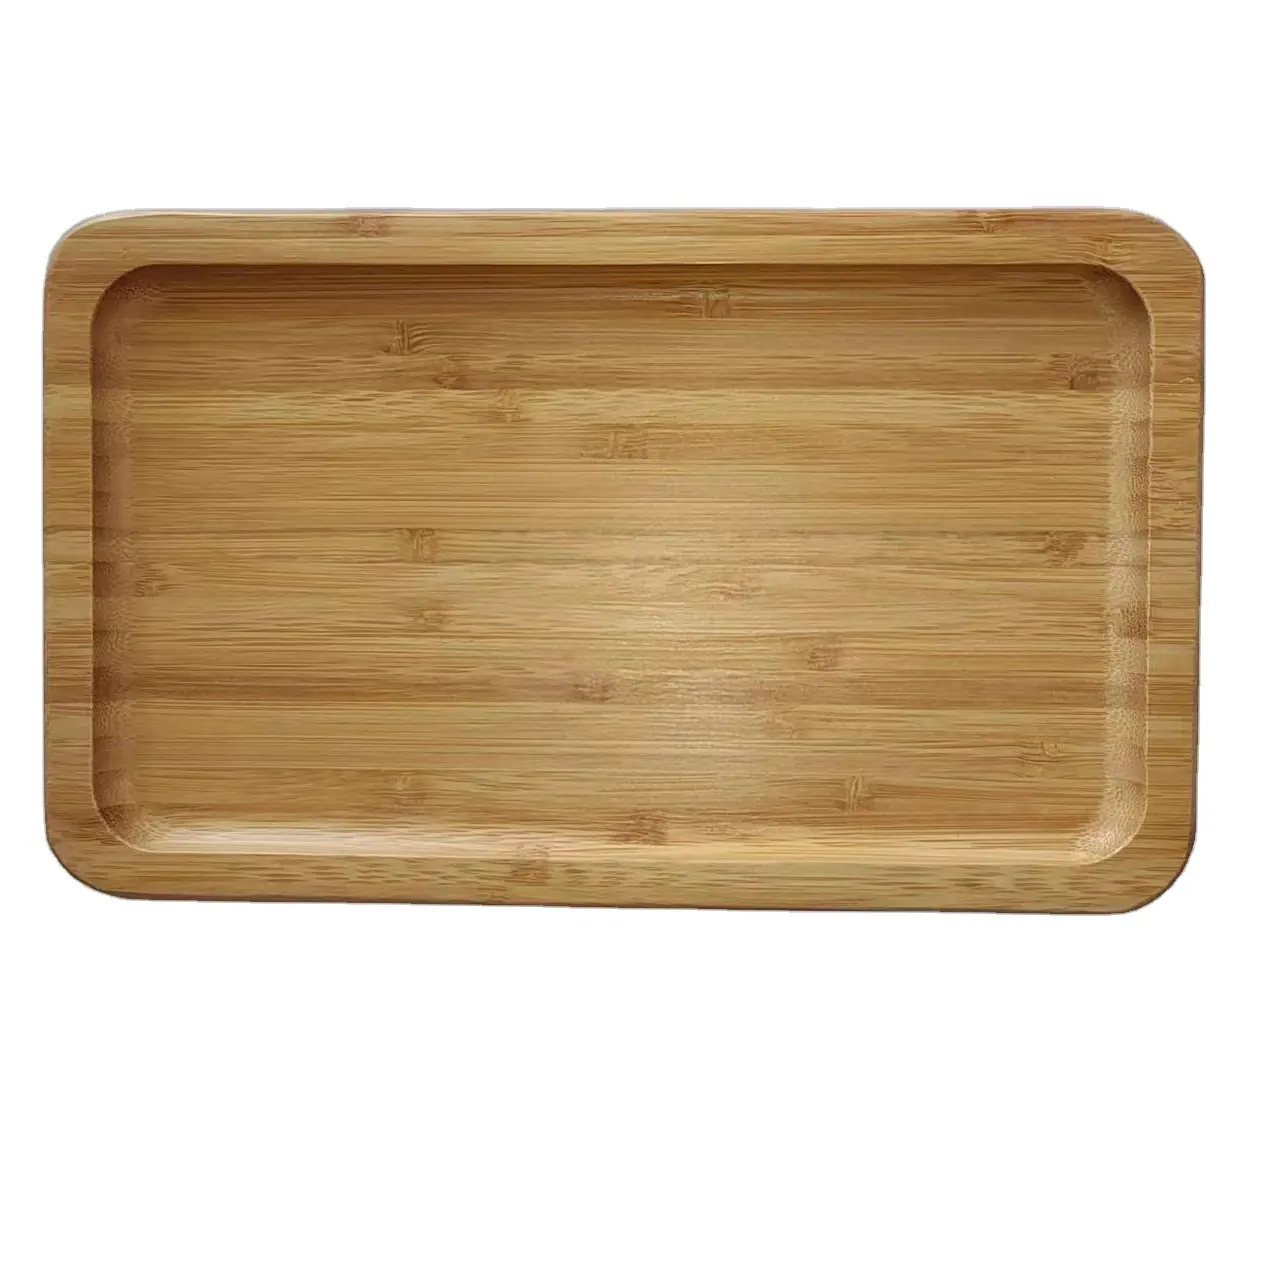 Best Selling Wooden Square Rectangular Cookies Serving Tray Wooden Tray